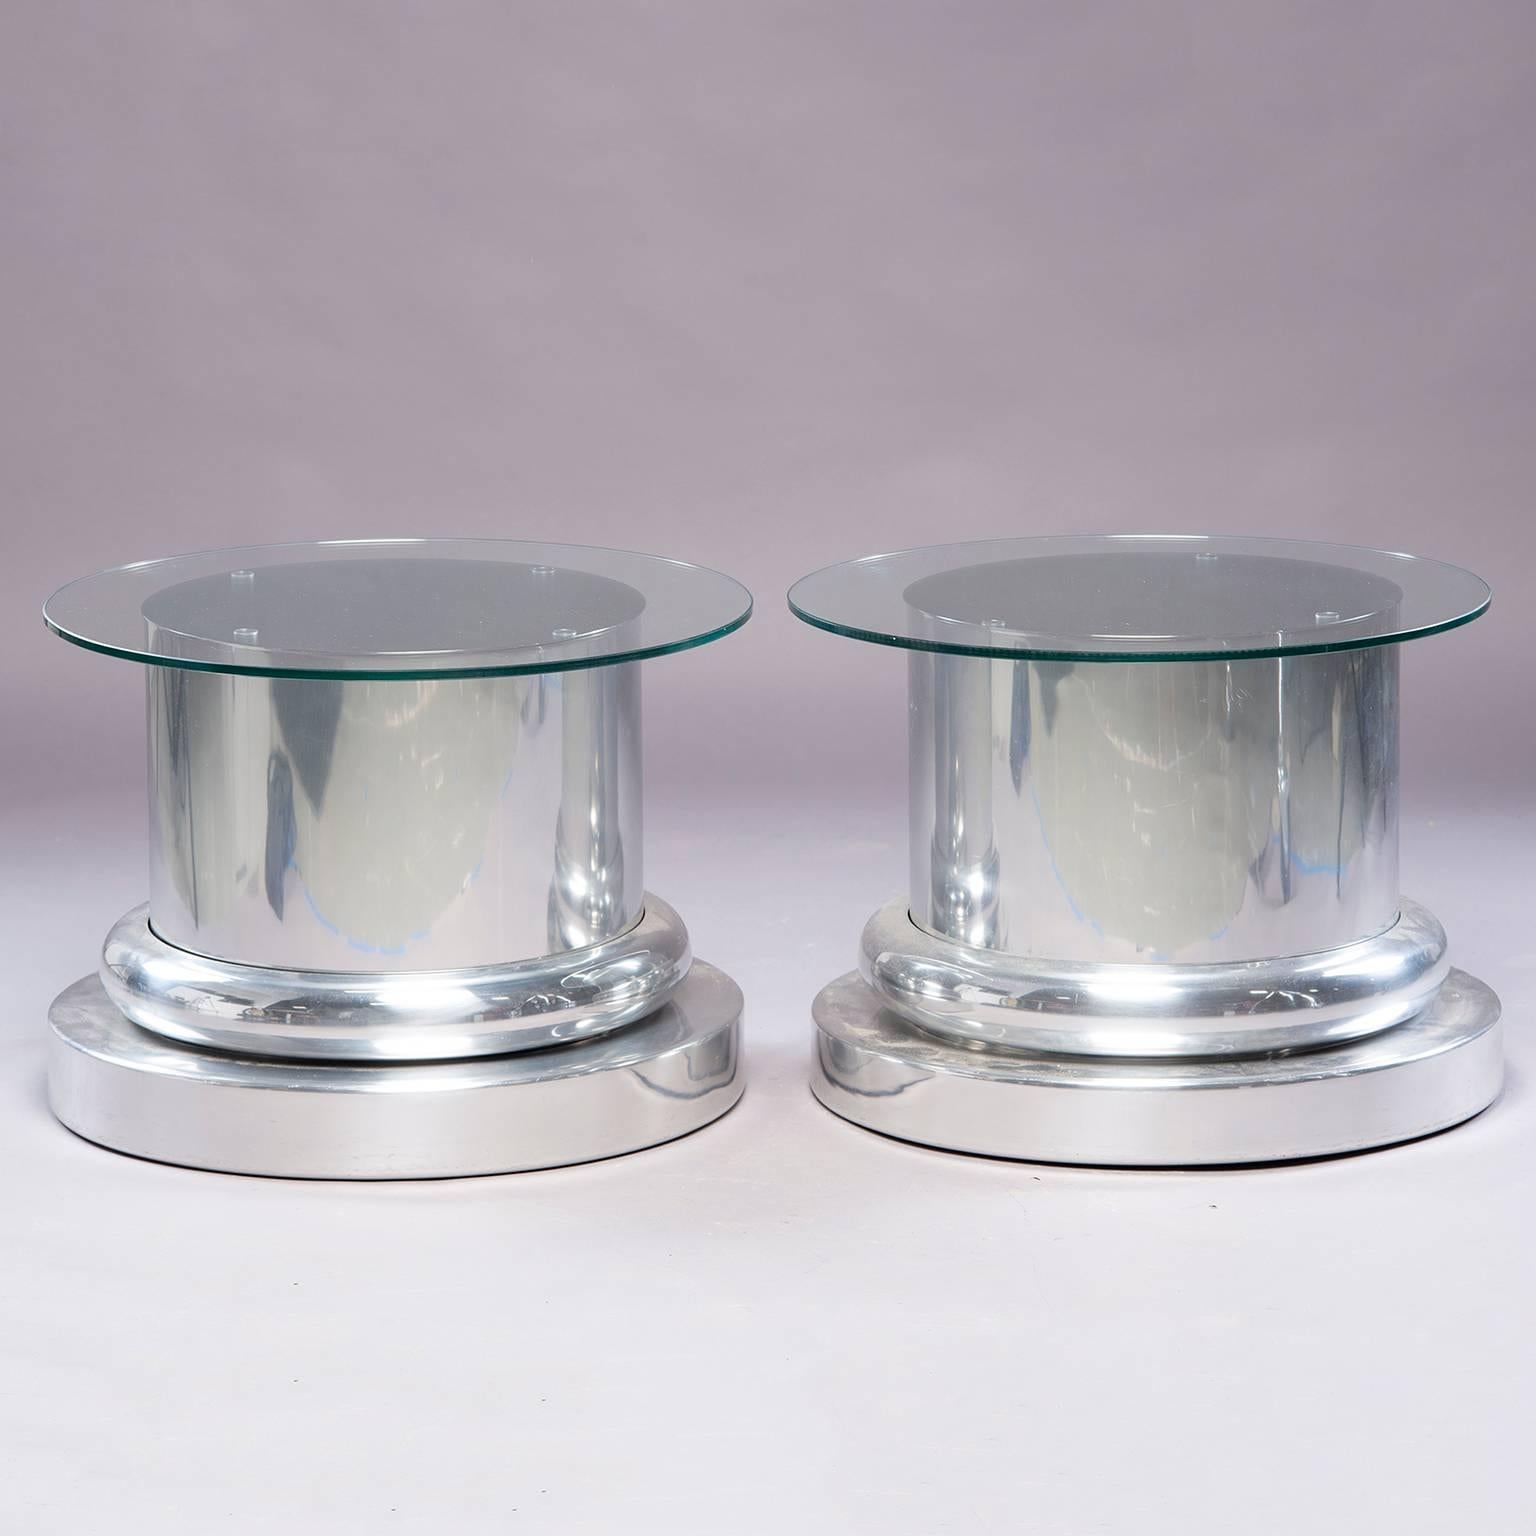 Pair of polished aluminium base side tables with glass tops attributed to Paul Mayen, circa 1970s. Glass is new. Aluminum bases have scattered surface scratches. Sold and priced as a pair.